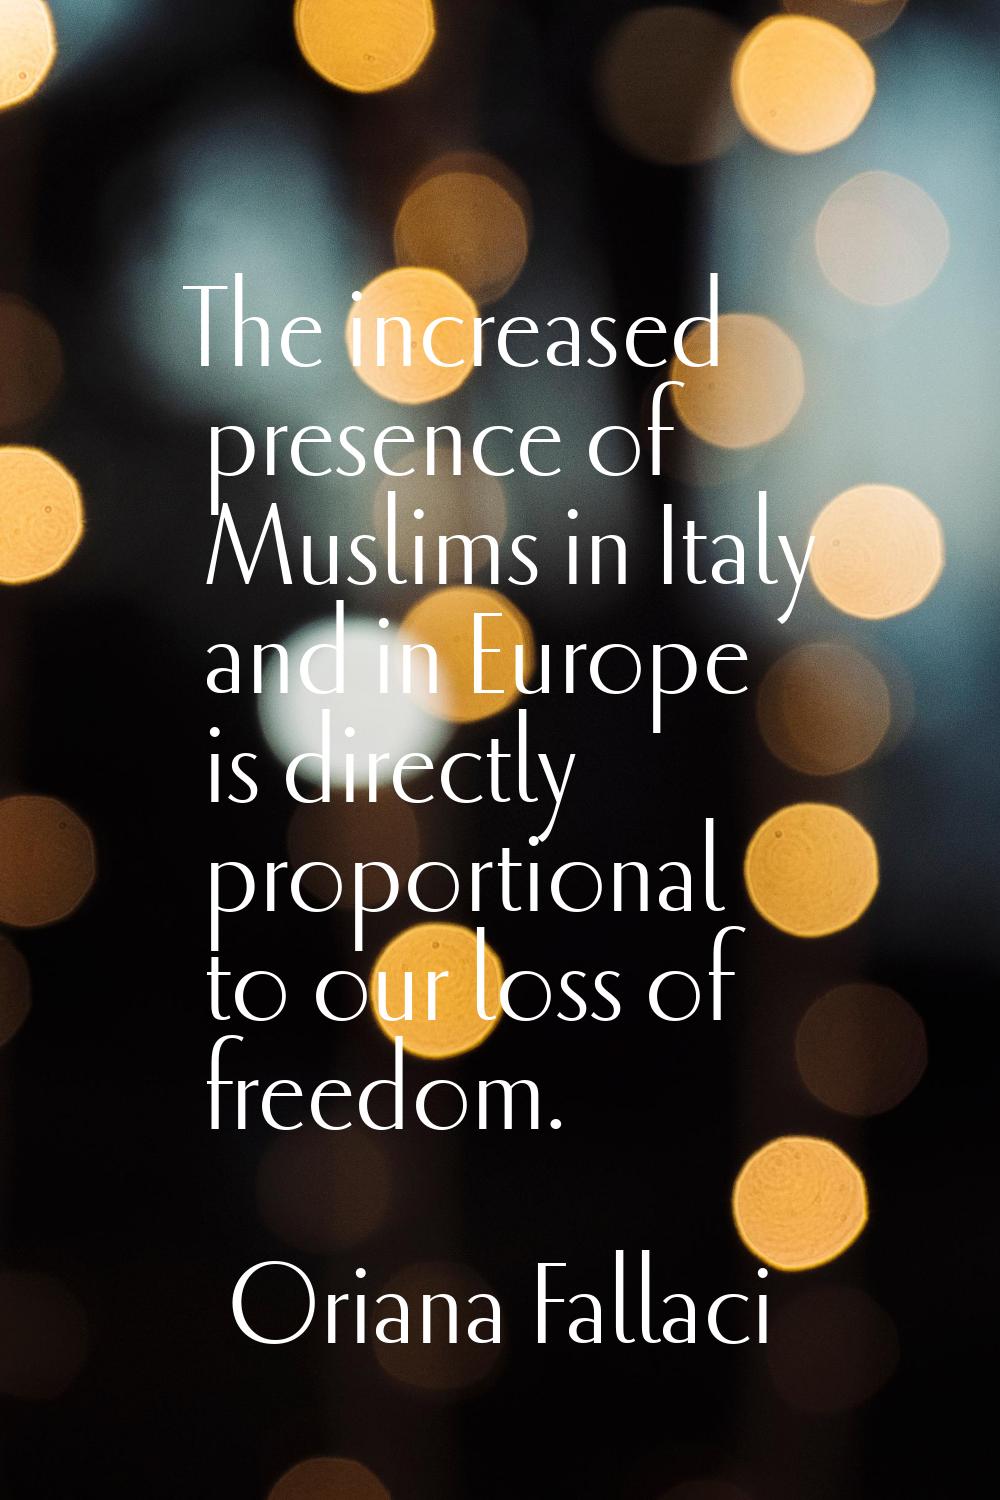 The increased presence of Muslims in Italy and in Europe is directly proportional to our loss of fr